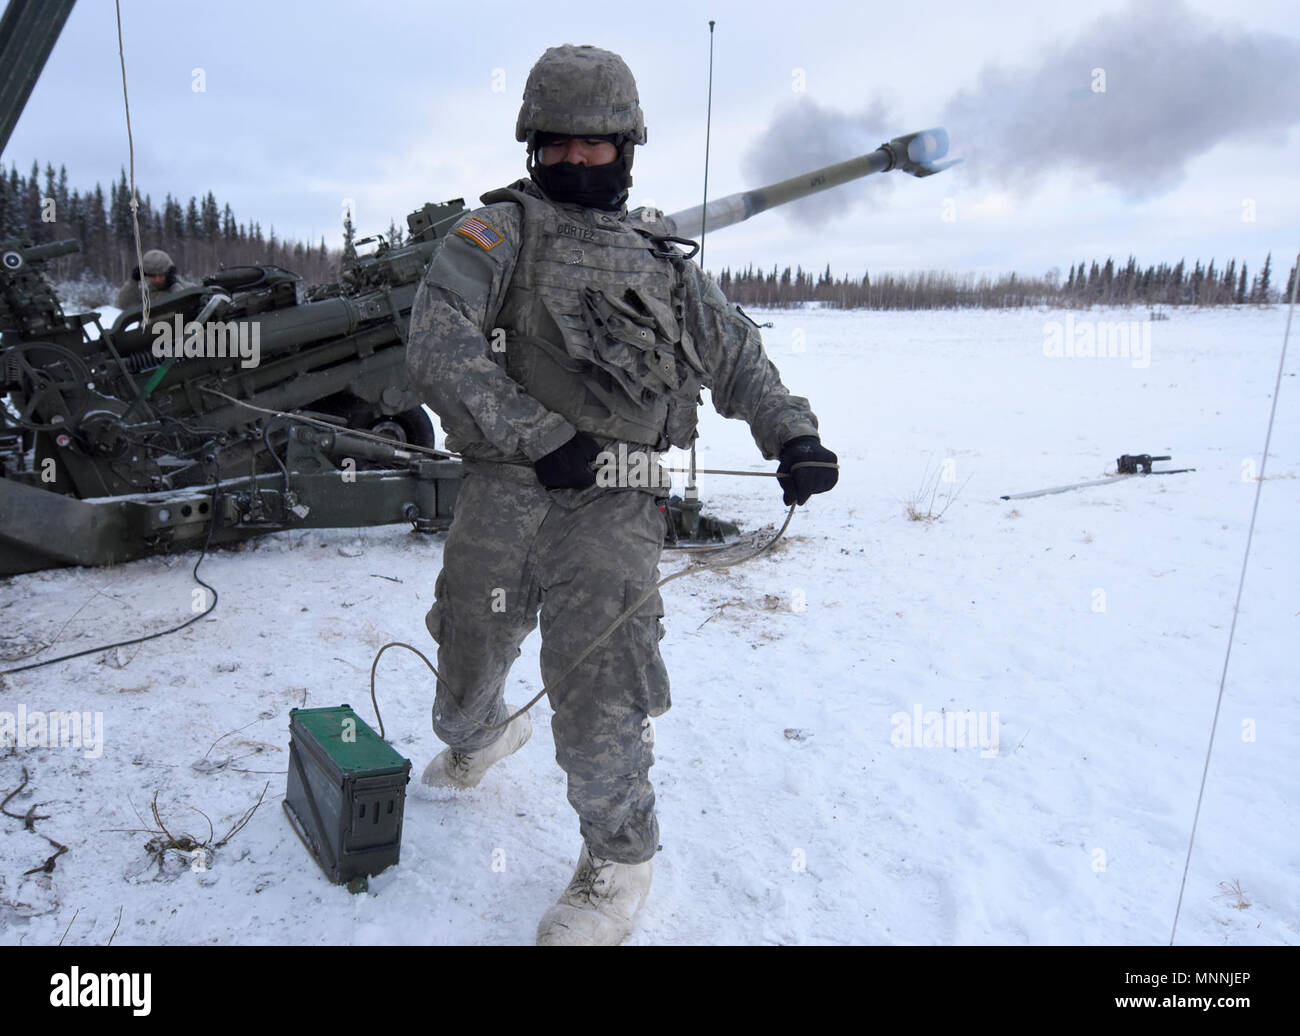 Pfc. Gerson Cortez, a cannon crew member assigned to 1st Stryker Brigade Combat Team, 25th Infantry Division, 2nd Battalion, 8th Field Artillery Regiment fires a M777 155mm Howitzer March 15 during a live fire training exercise at Fort Greely, Alaska, as part of the U.S. Army Alaska-led Joint Force Land Component Command in support of Alaskan Command's exercise Arctic Edge 18 conducted under the authority of U.S. Northern Command. Arctic Edge 2018 is a biennial, large-scale, joint-training exercise that prepares and tests the U.S. military's ability to operate tactically in the extreme cold-we Stock Photo